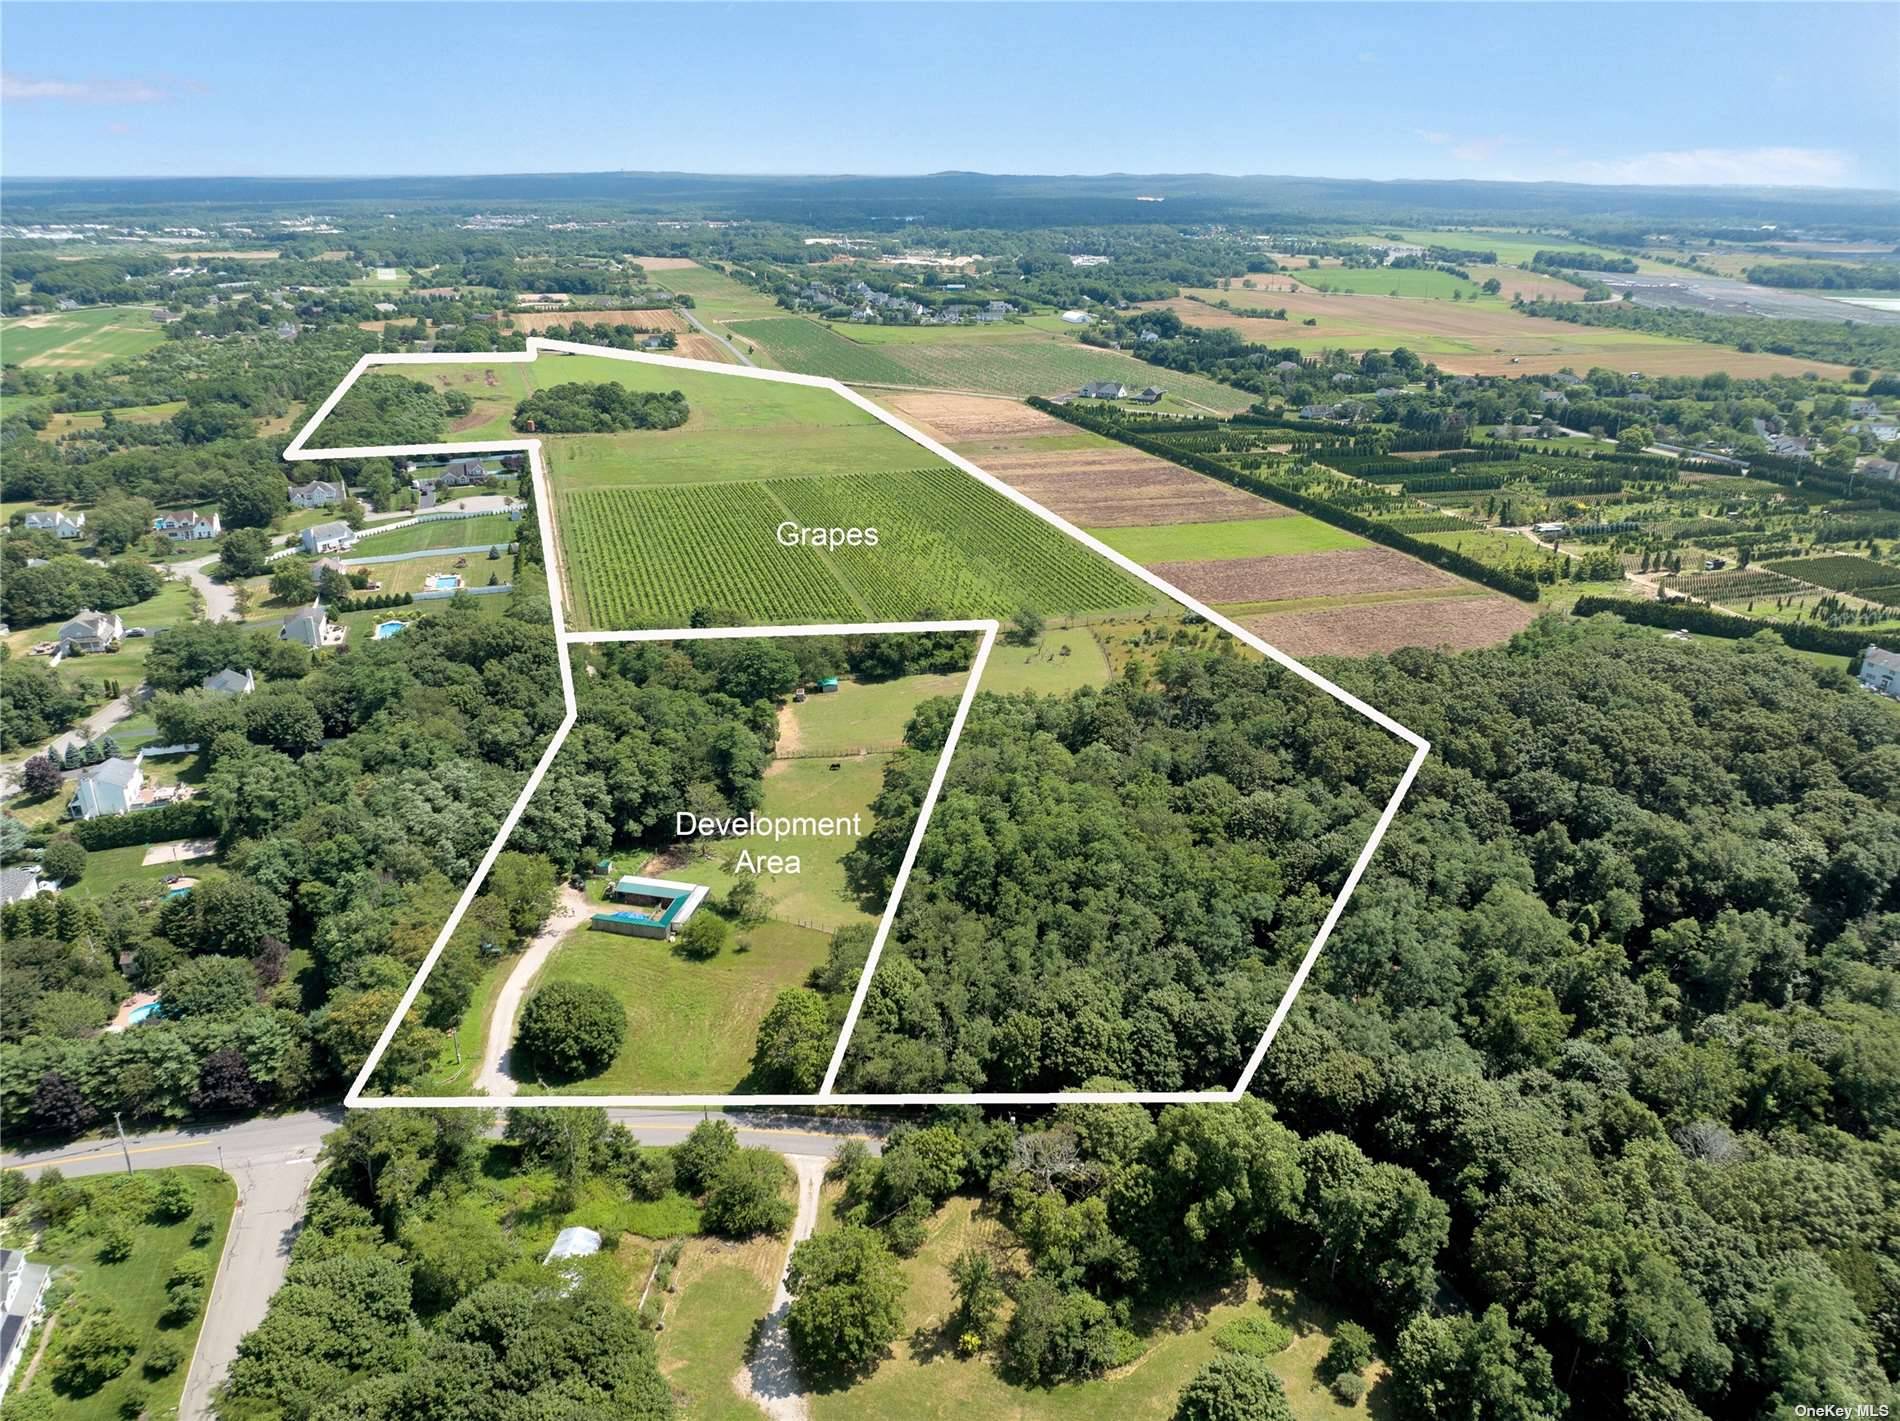 36 acres of certified organic farmland, farmed utilizing the biodynamic principles of Rudolf Steiner, with 26 acres preserved ; 6 acres committed to preservation ; amp ; 4 acres, fronting ...